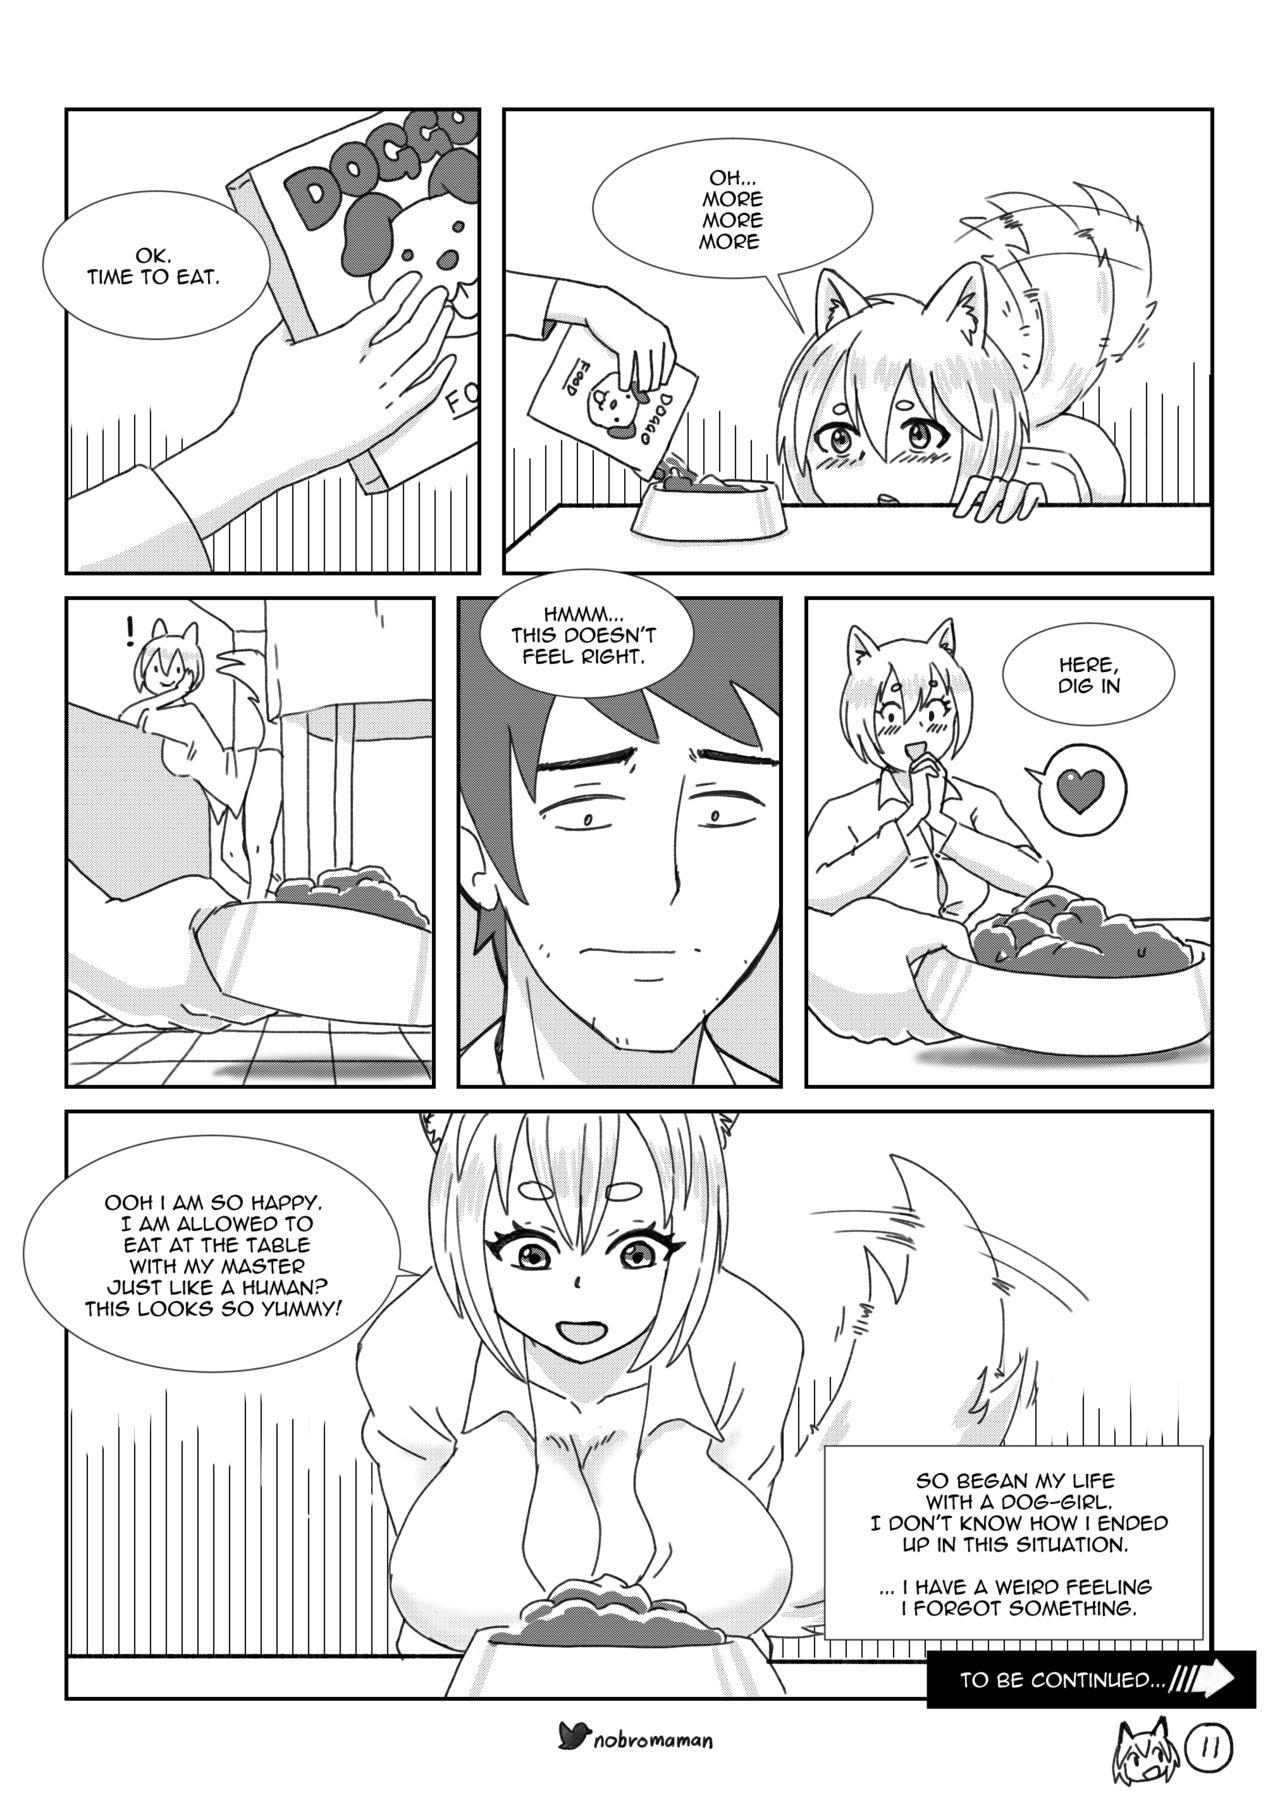 Car Life with a dog girl - Chapter1 Head - Page 12